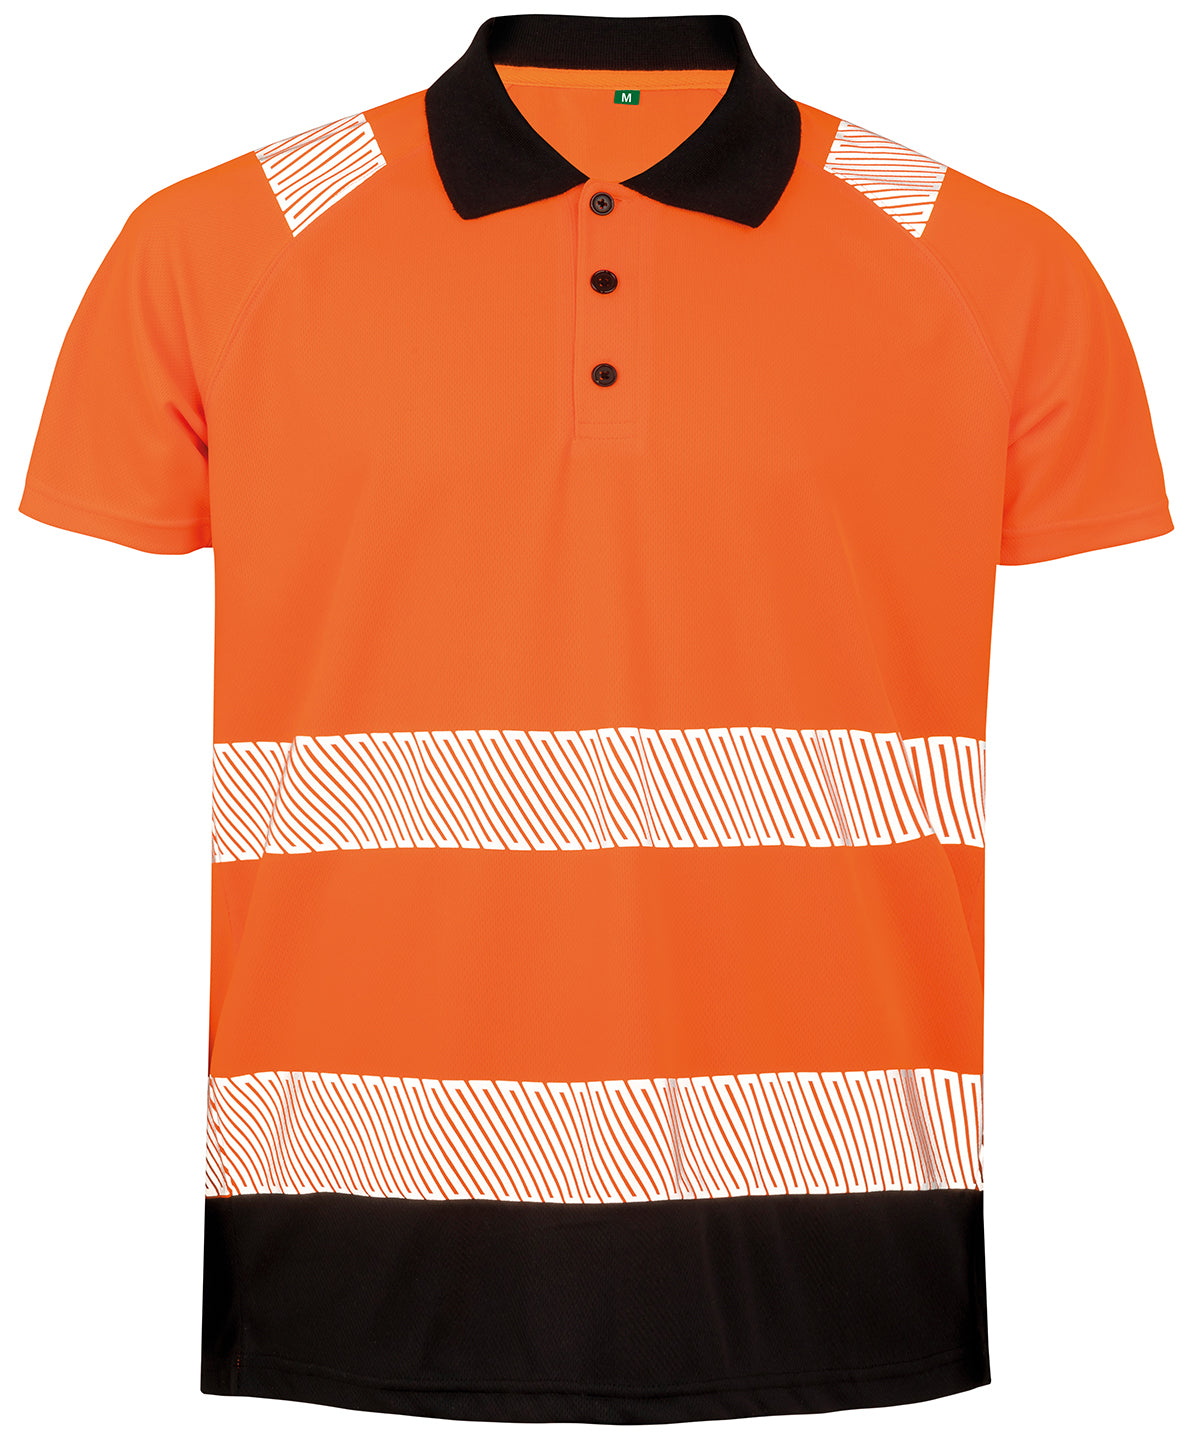 Result Recycled safety polo